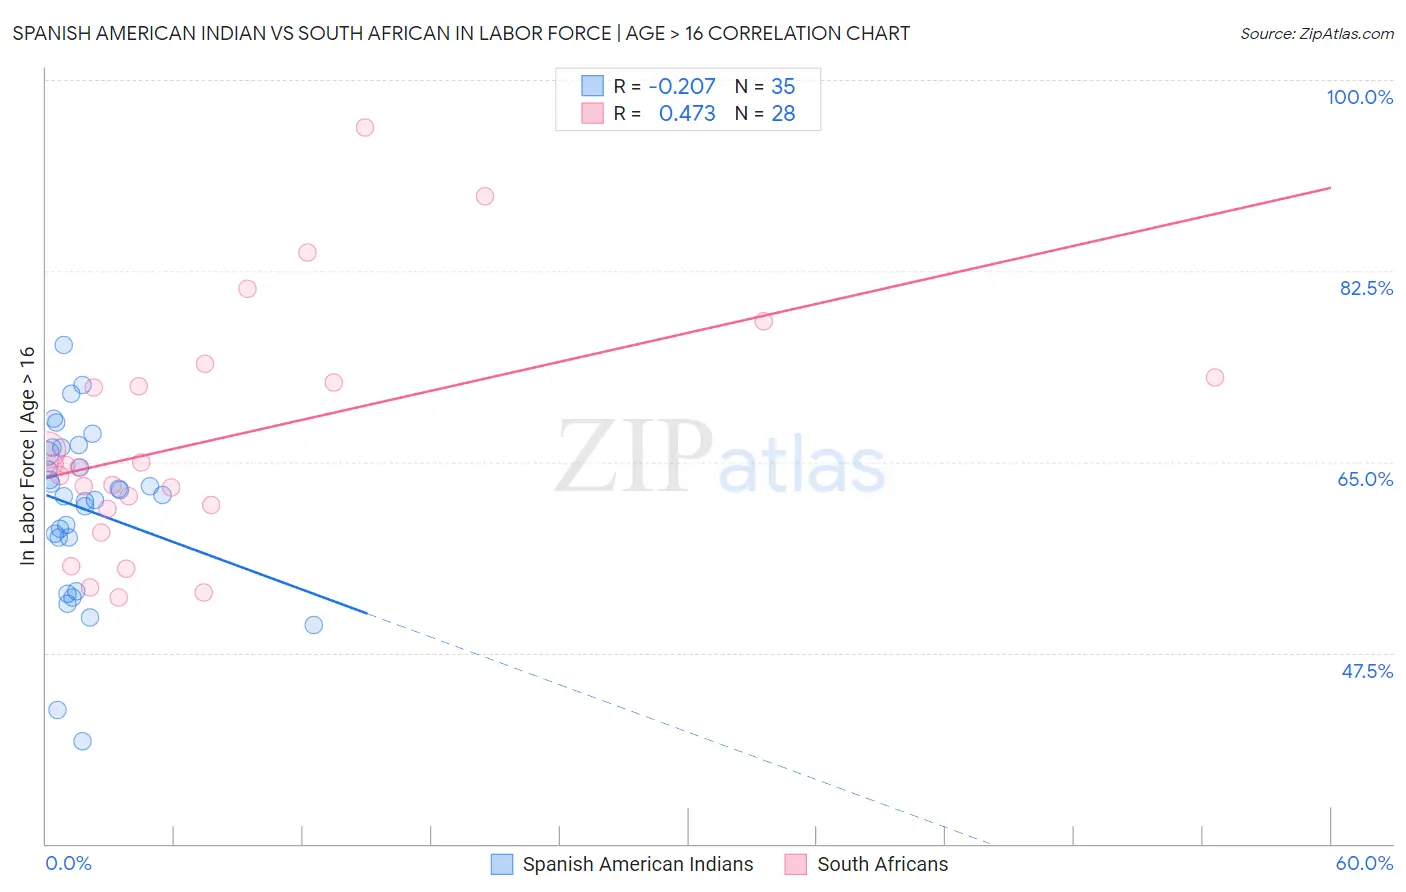 Spanish American Indian vs South African In Labor Force | Age > 16